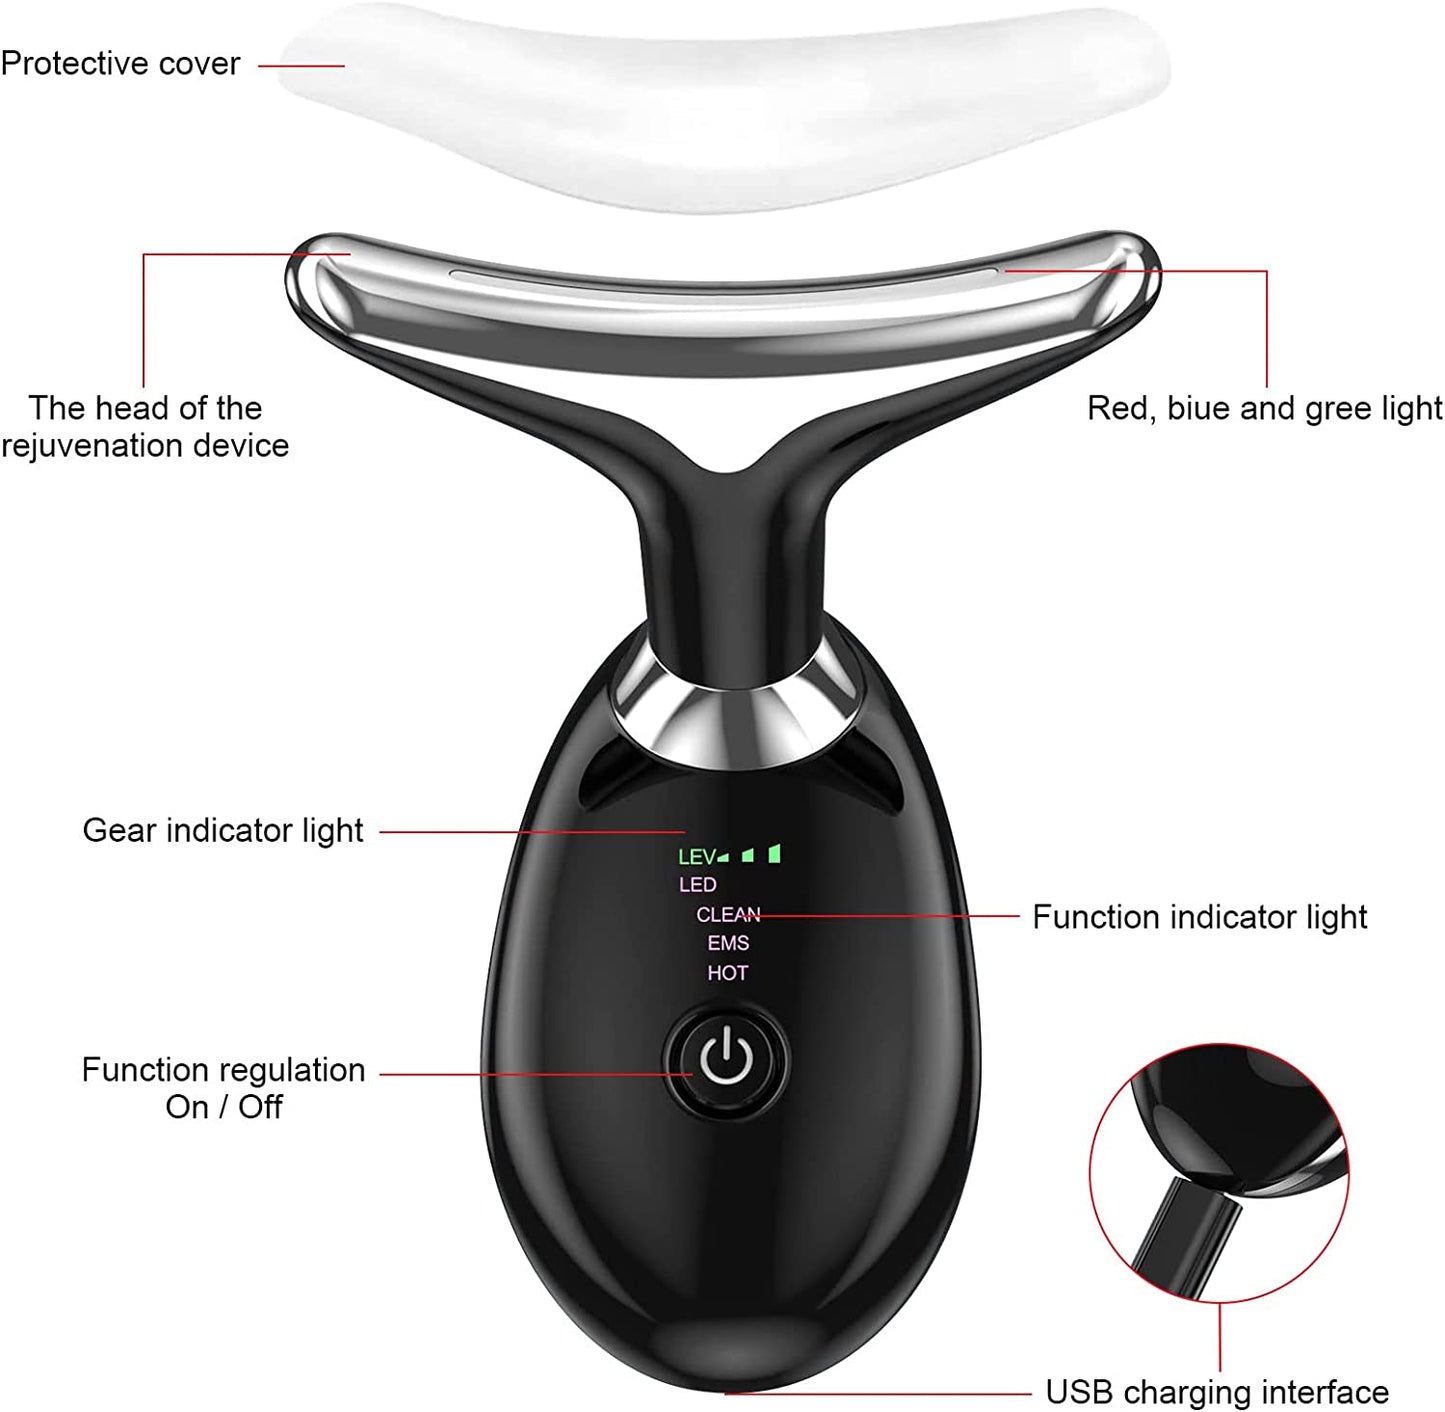 COOLBABY MLTI-MSGR Facial Neck Lifting Machine Sonic Face Massager Beauty Device Wrinkles Remover Skin Rejuvenation Anti-aging Rechargeable 3 Modes Black - COOLBABY